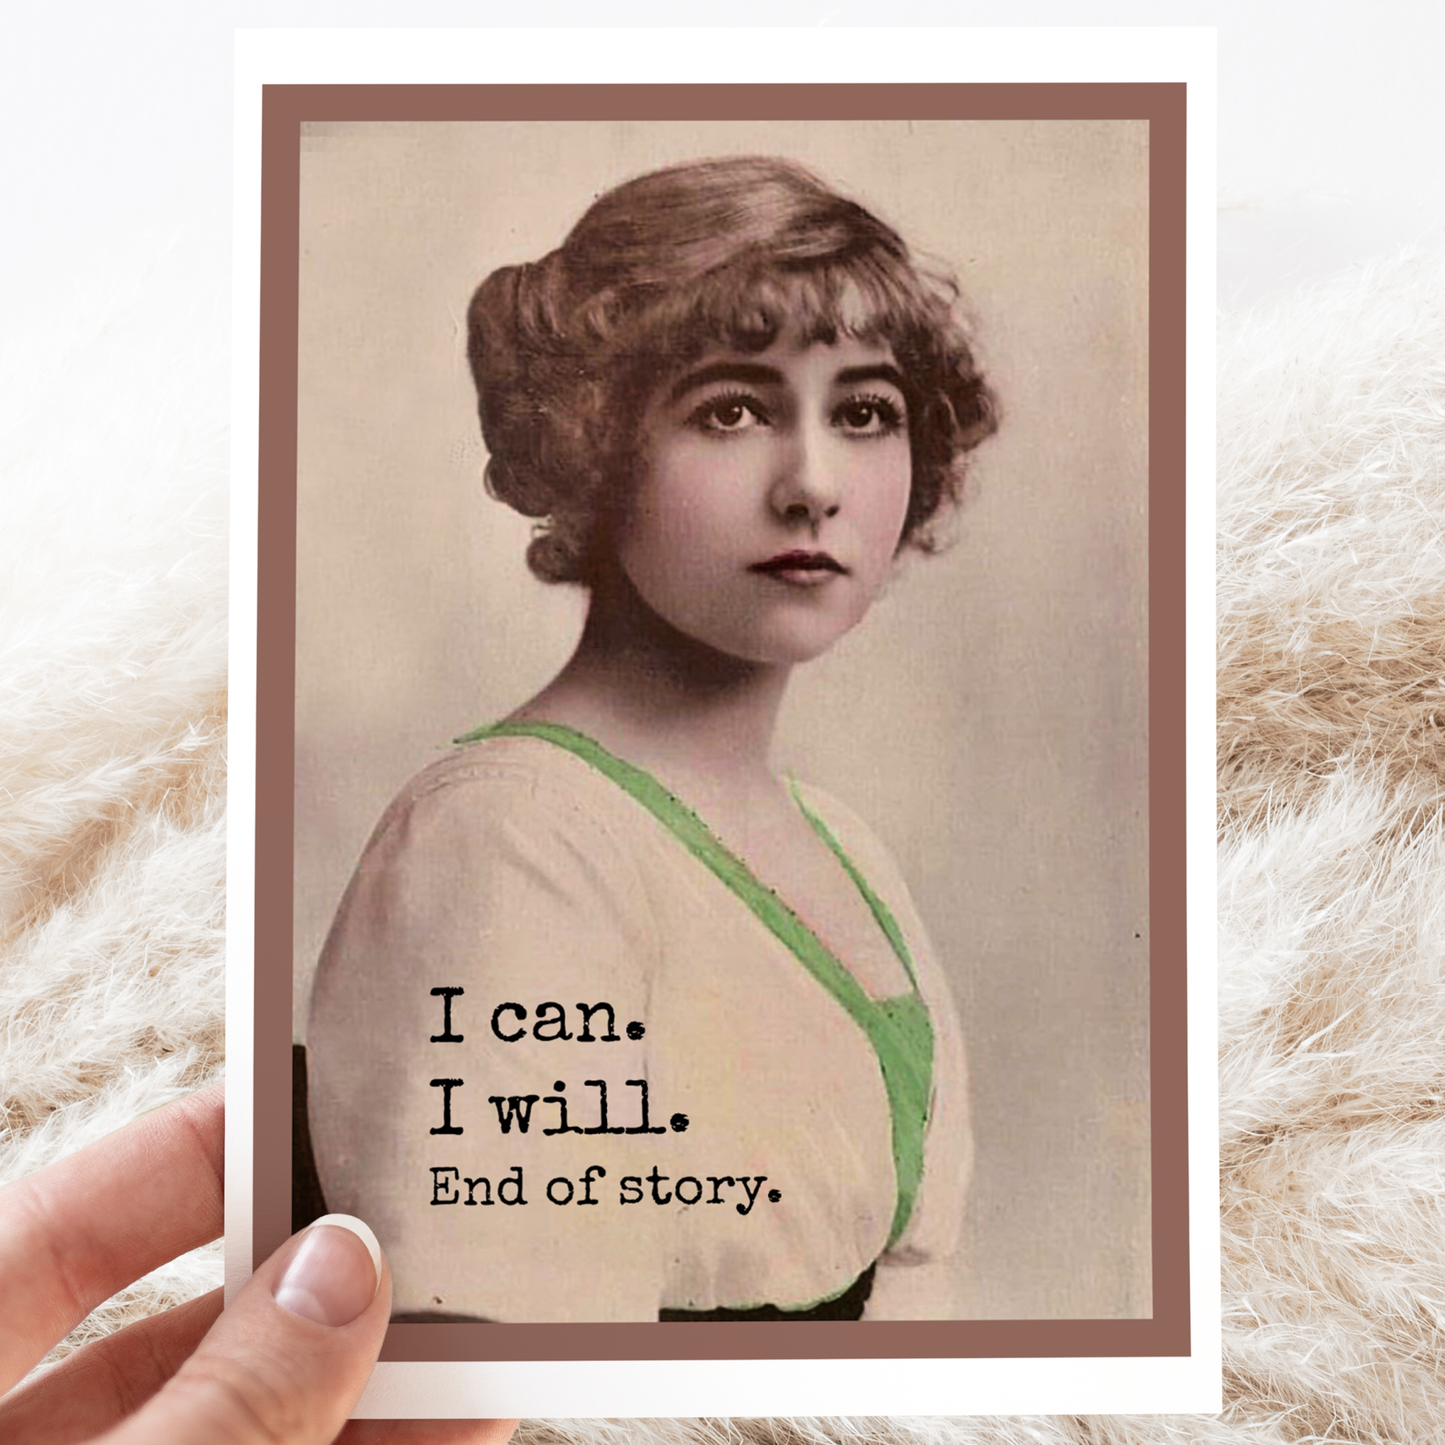 Raven's Rest Studio | Greeting Card - I Can. I Will. End of Story.